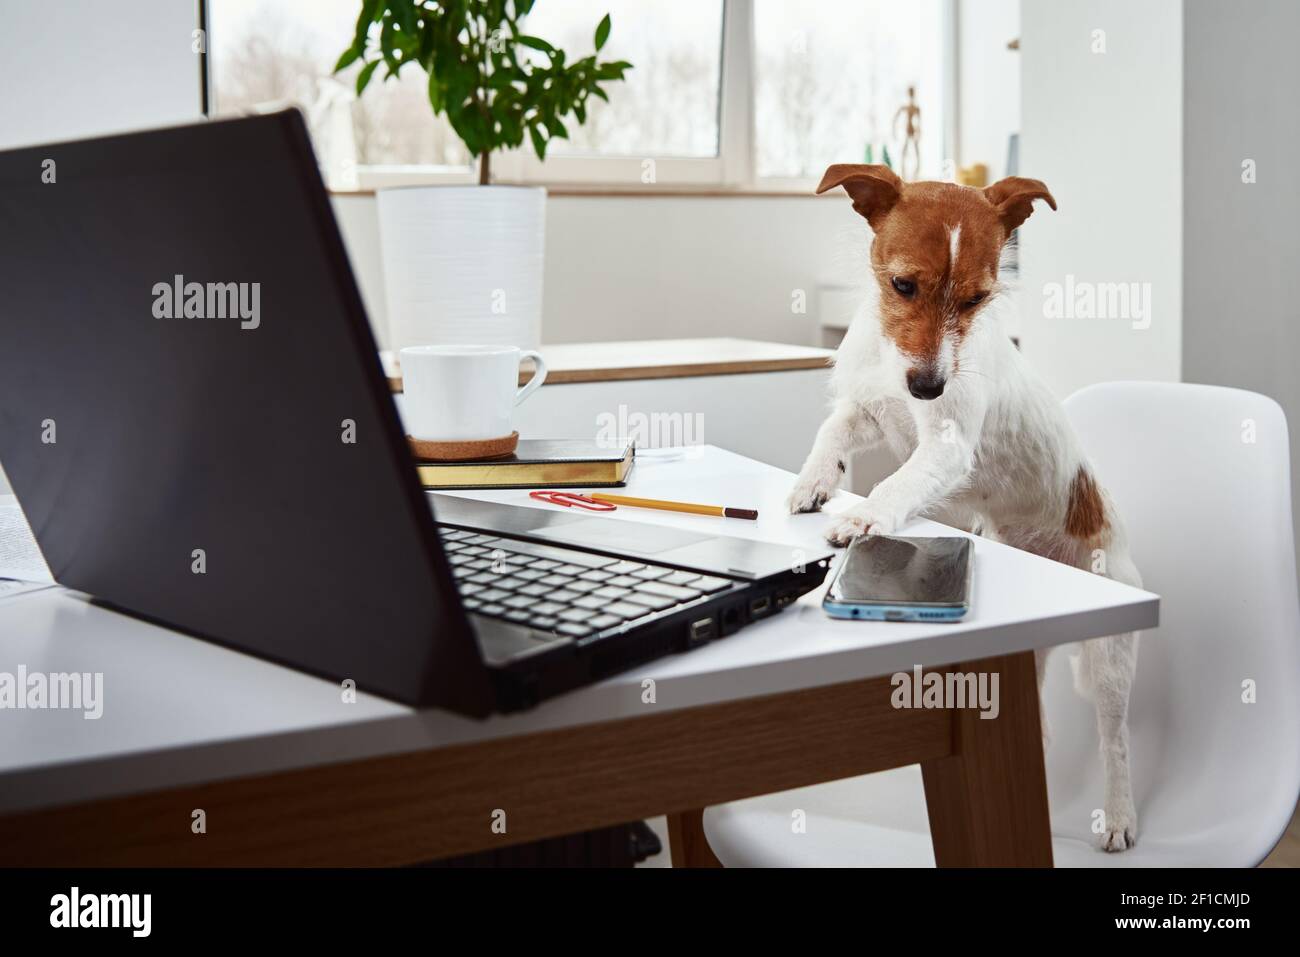 Dog working on laptop at home office. Remote work concept Stock Photo